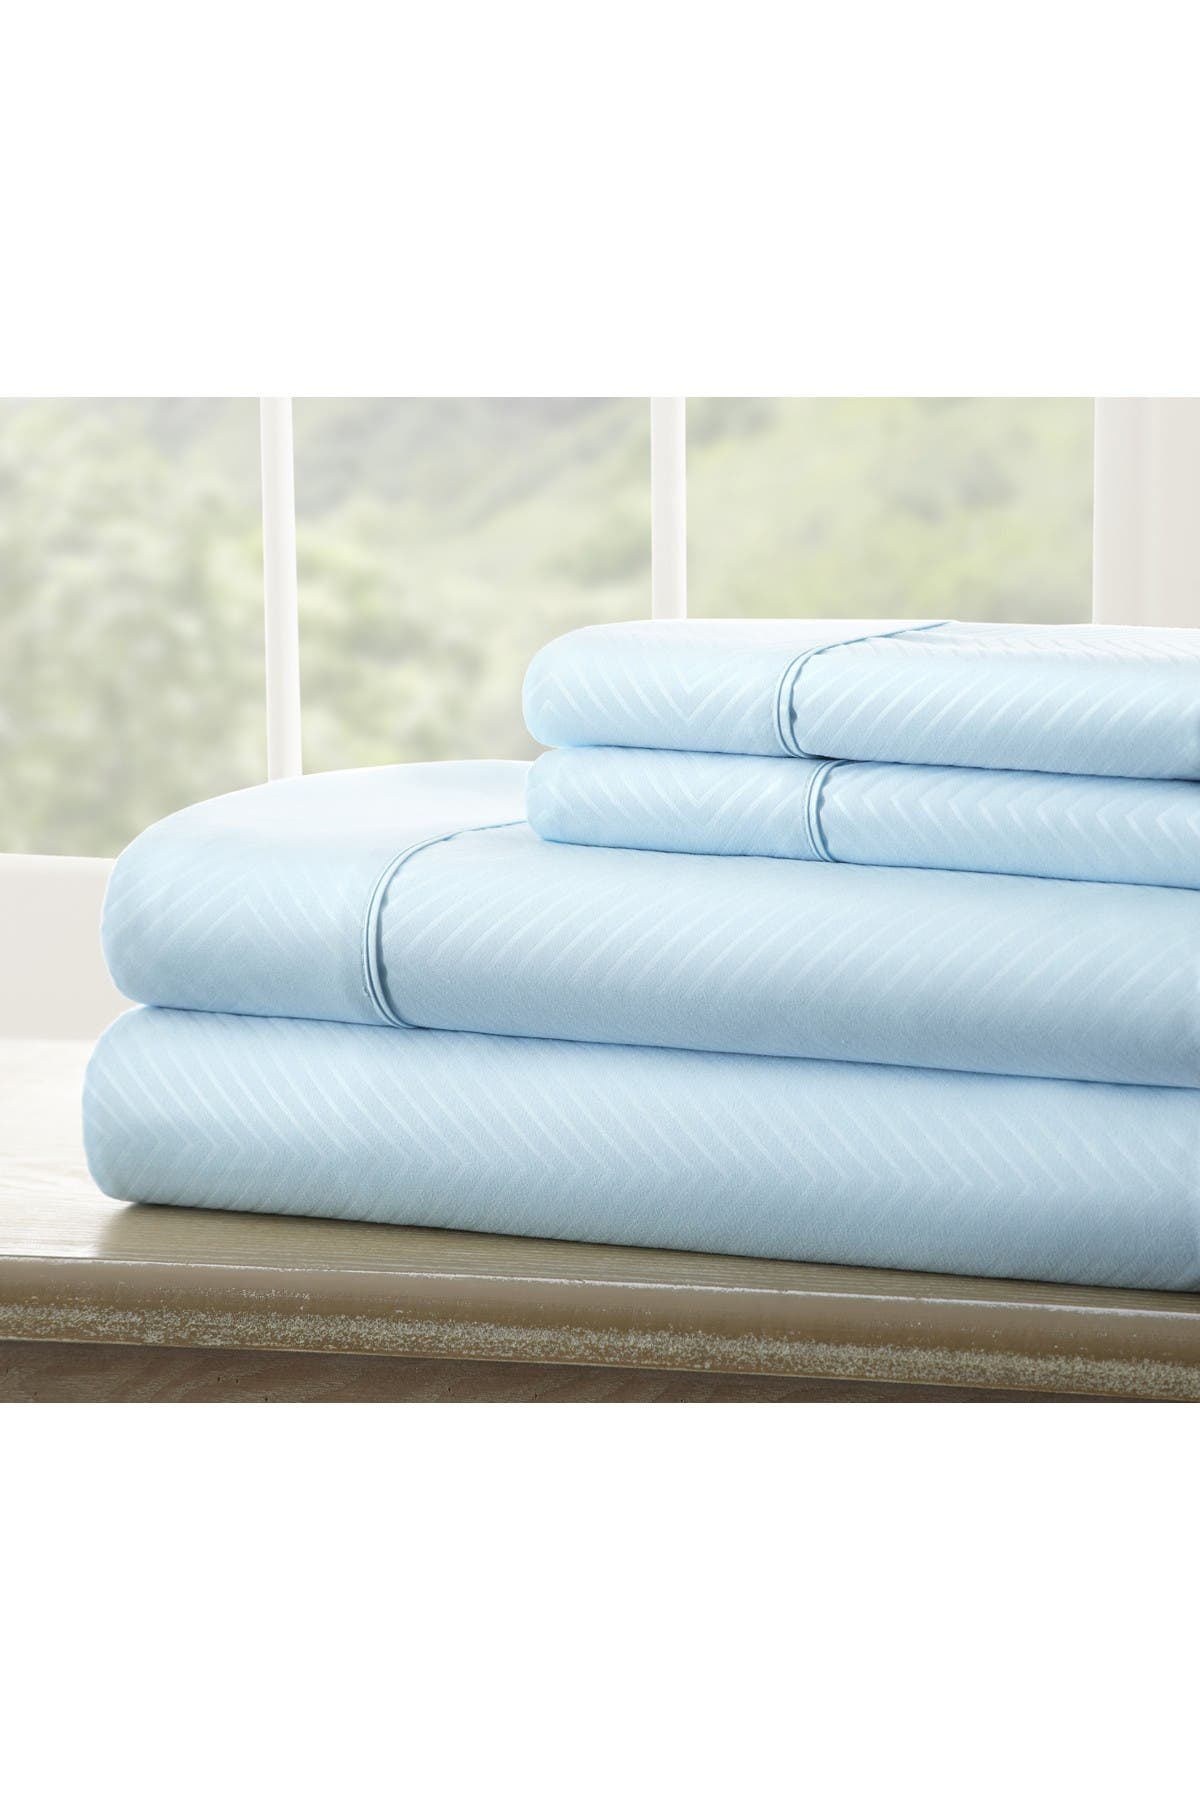 Ienjoy Home California King Hotel Collection Premium Ultra Soft 4-piece Chevron Bed Sheet Set In Blue